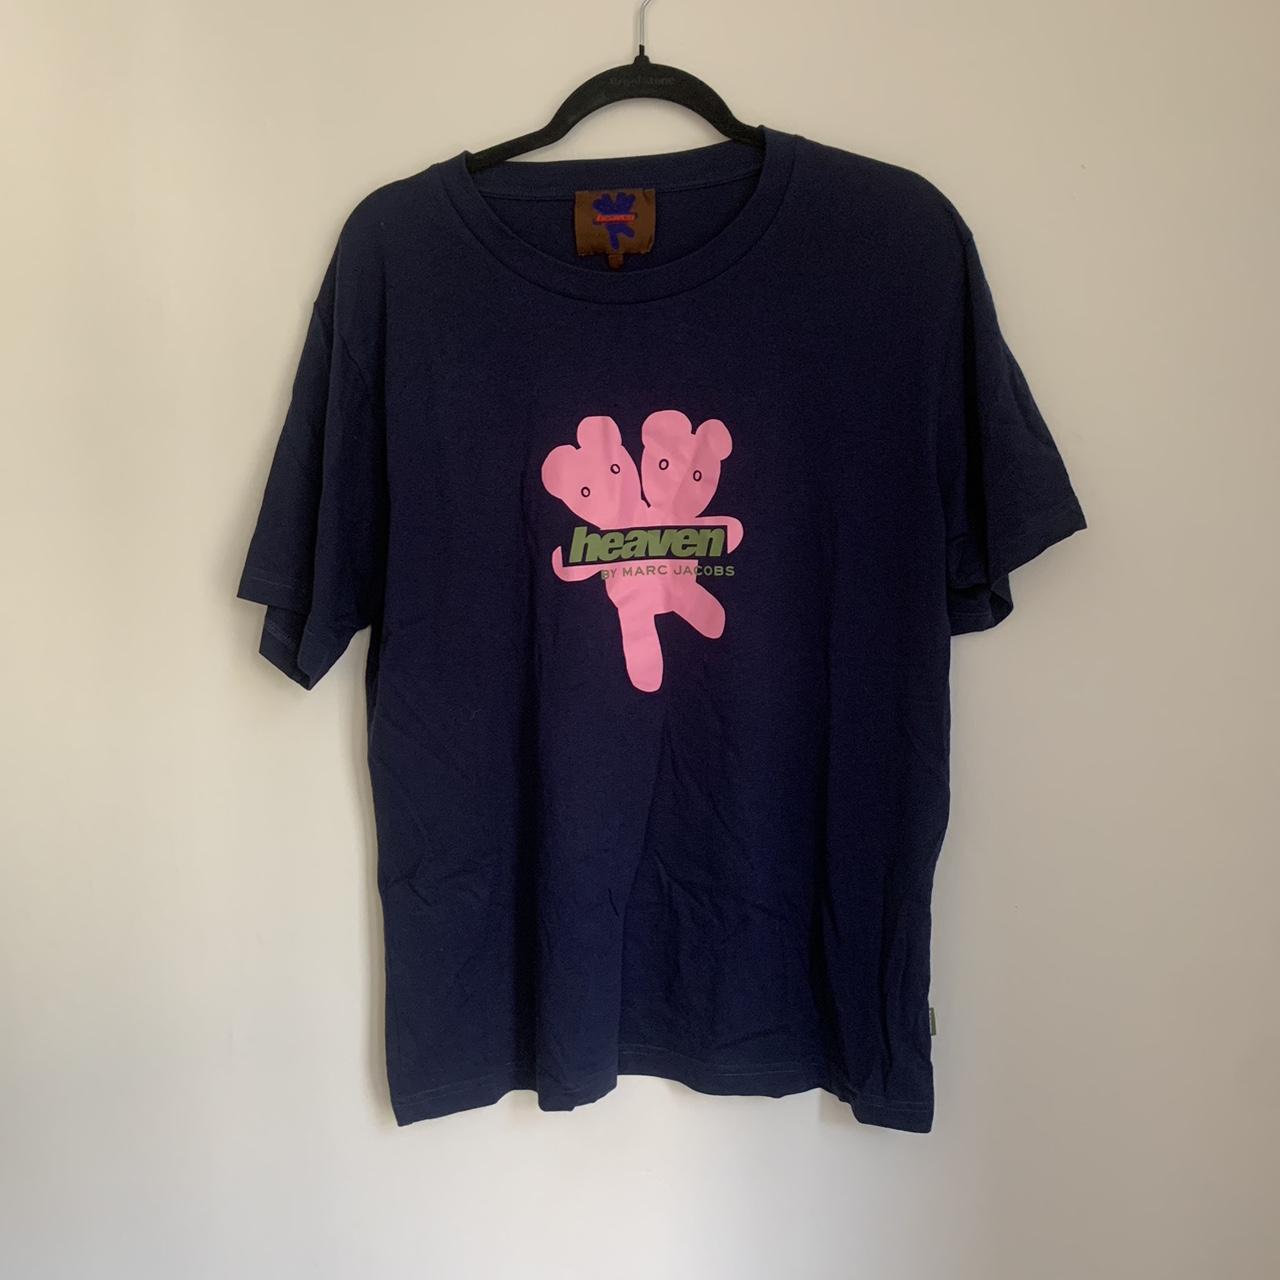 Marc Jacobs Heaven Teddy Bear T-Shirt., From the...